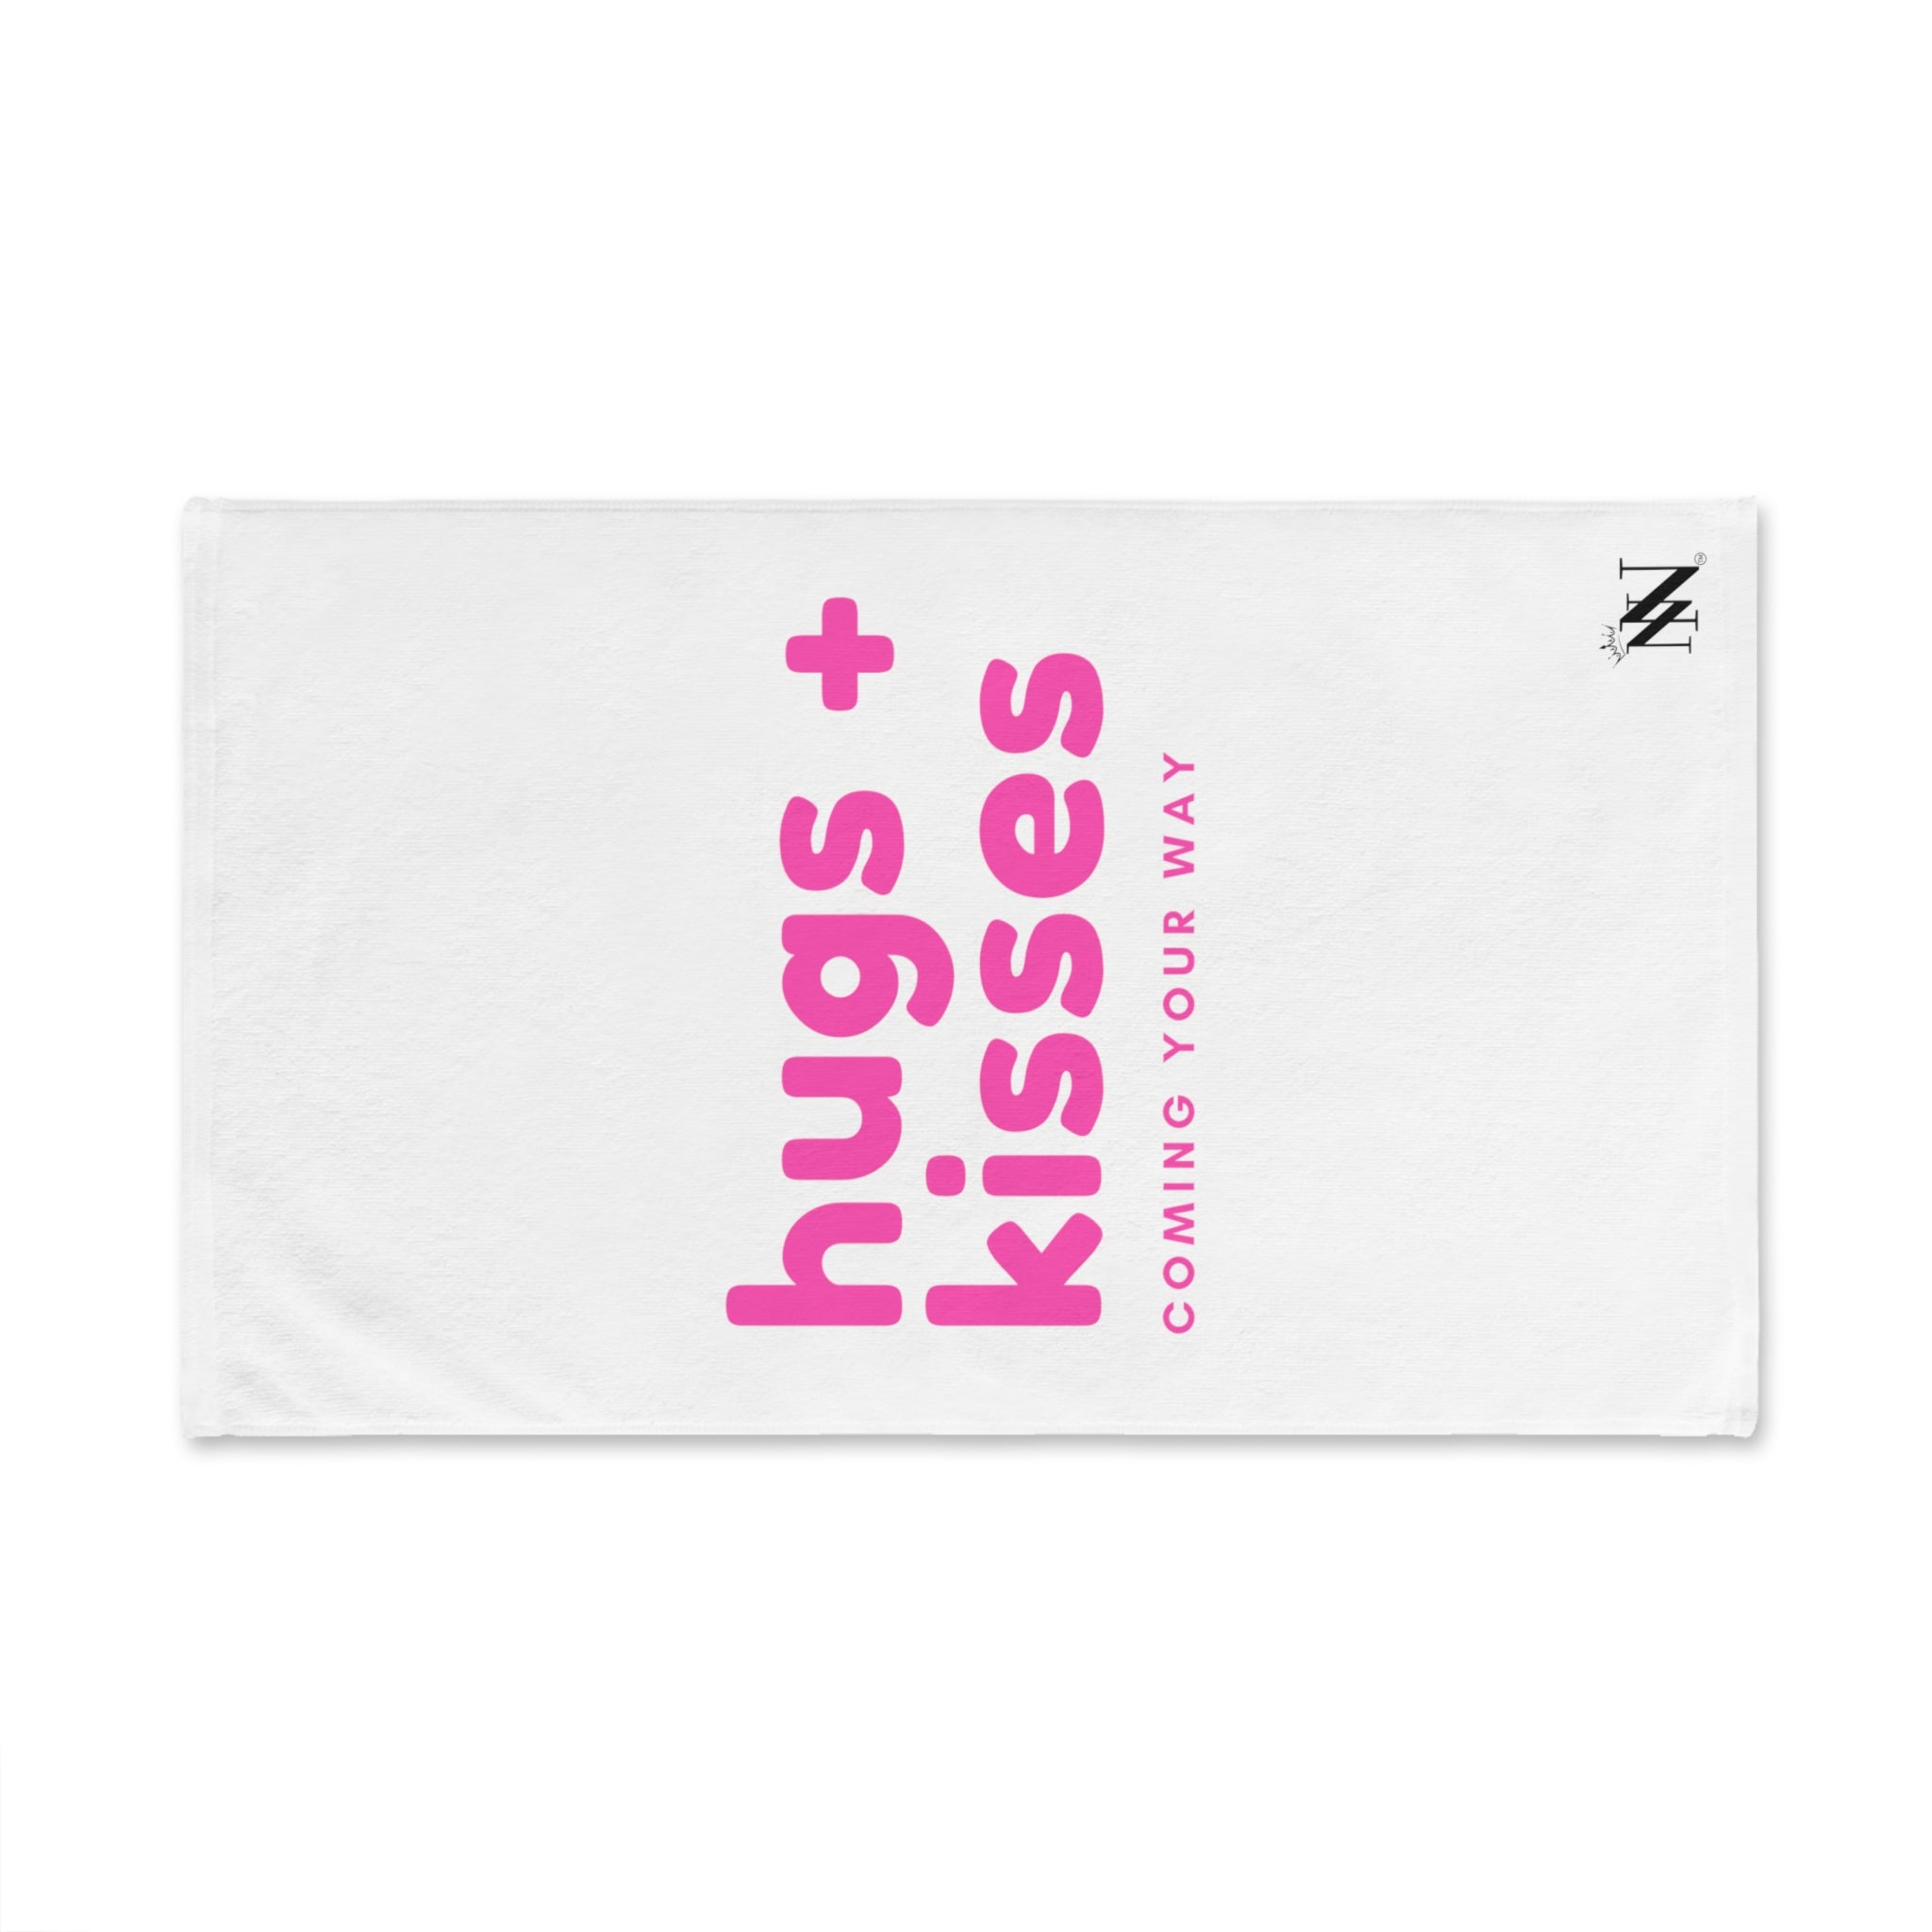 Hugs Kisses White | Funny Gifts for Men - Gifts for Him - Birthday Gifts for Men, Him, Her, Husband, Boyfriend, Girlfriend, New Couple Gifts, Fathers & Valentines Day Gifts, Christmas Gifts NECTAR NAPKINS